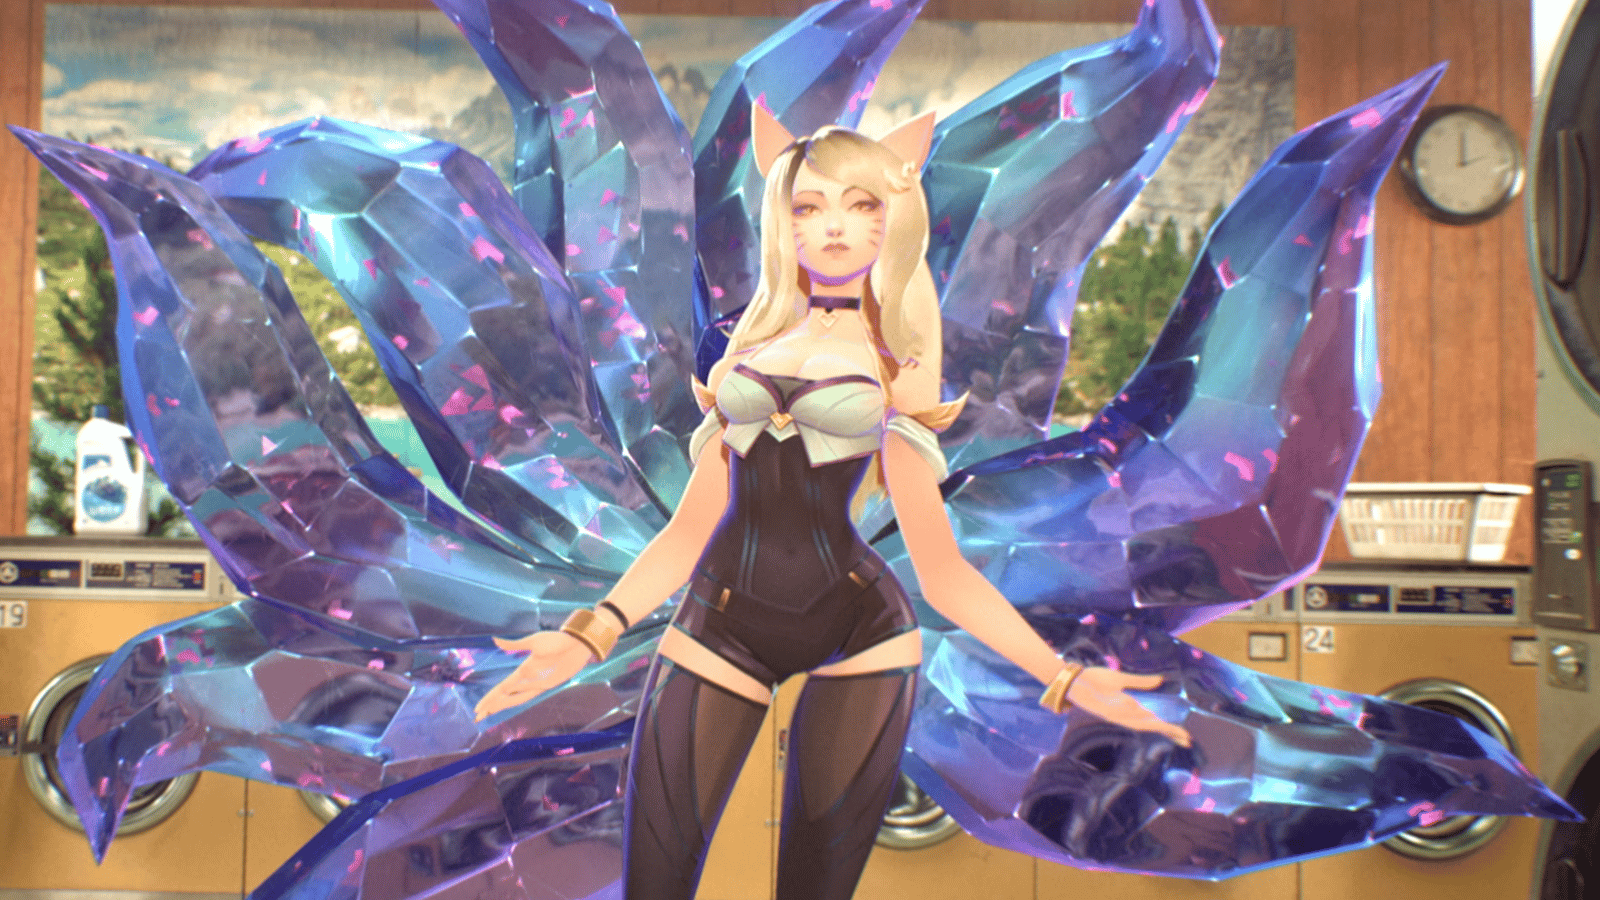 Animated K/DA popstar Ahri is voiced by (G)I-dle star Miyeon for the smash hit 